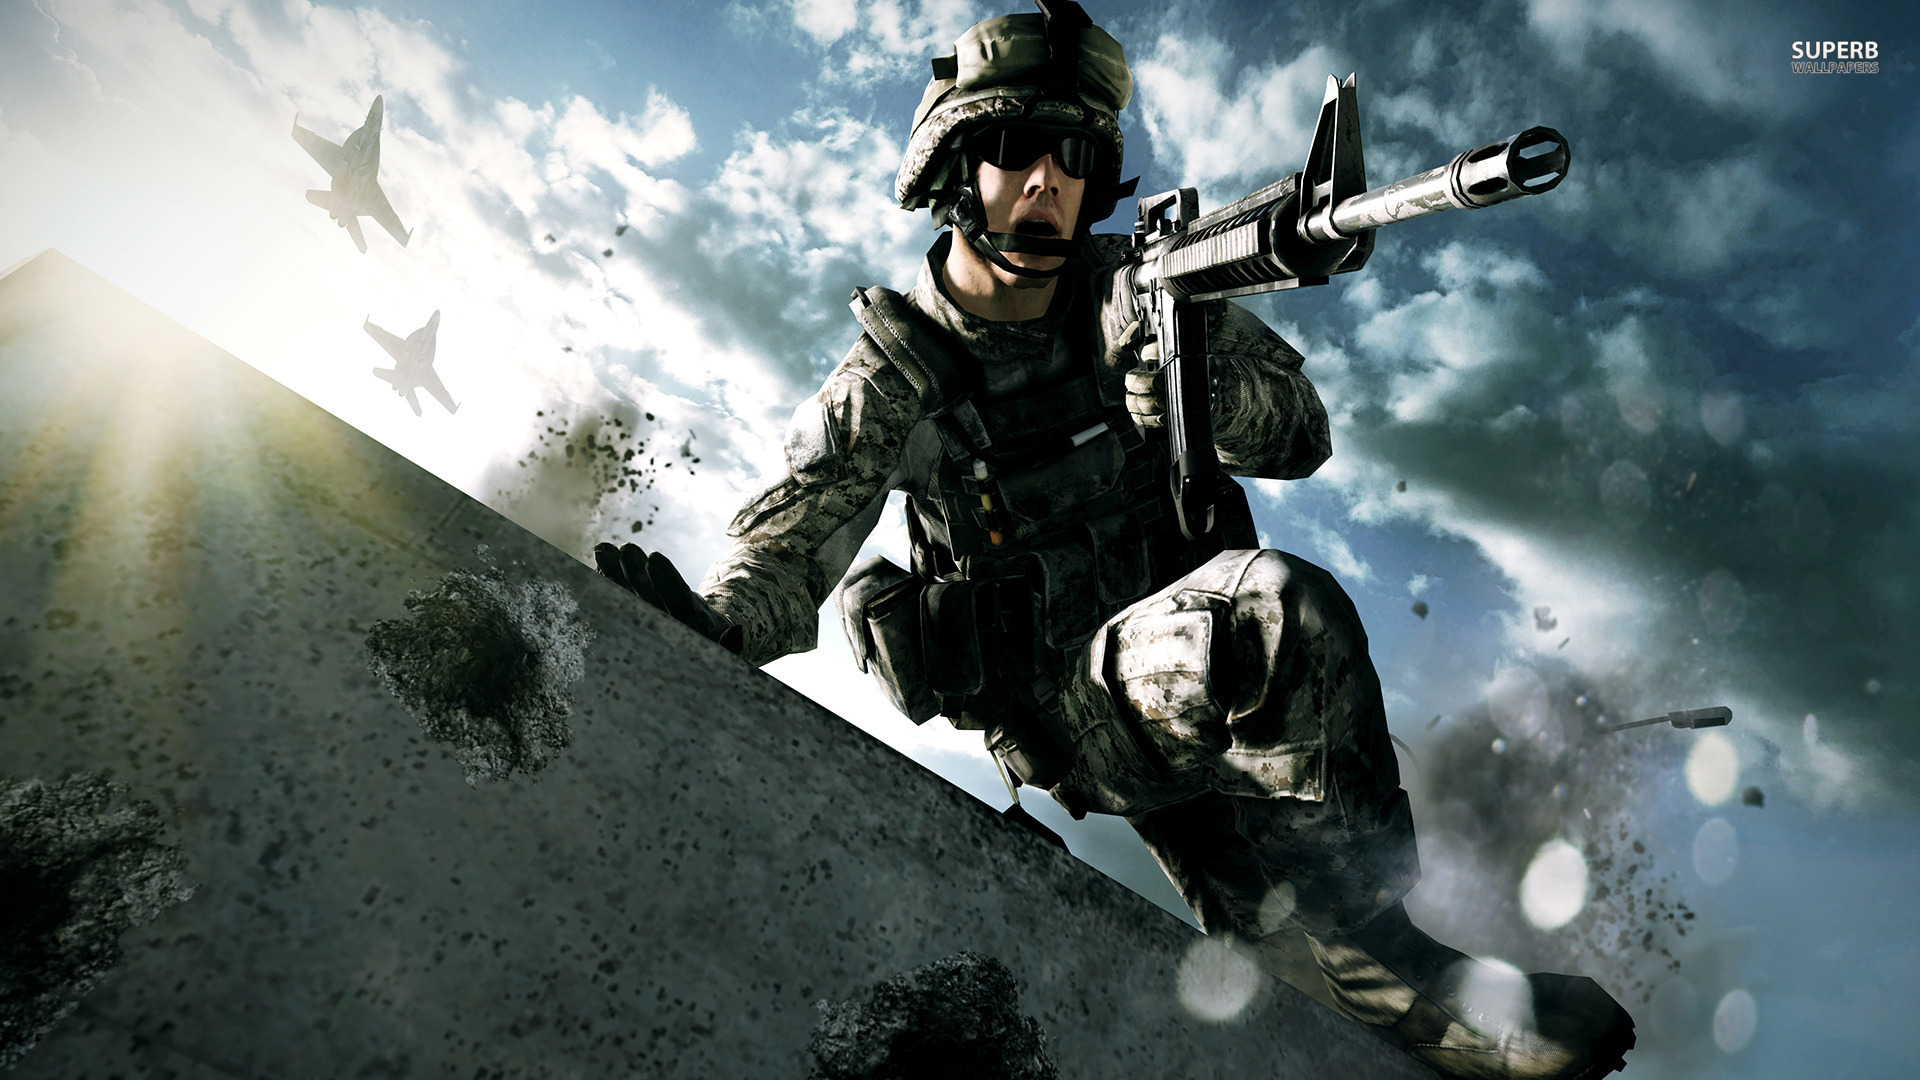 wallpaper details file name battlefield 4 hd wallpapers uploaded by